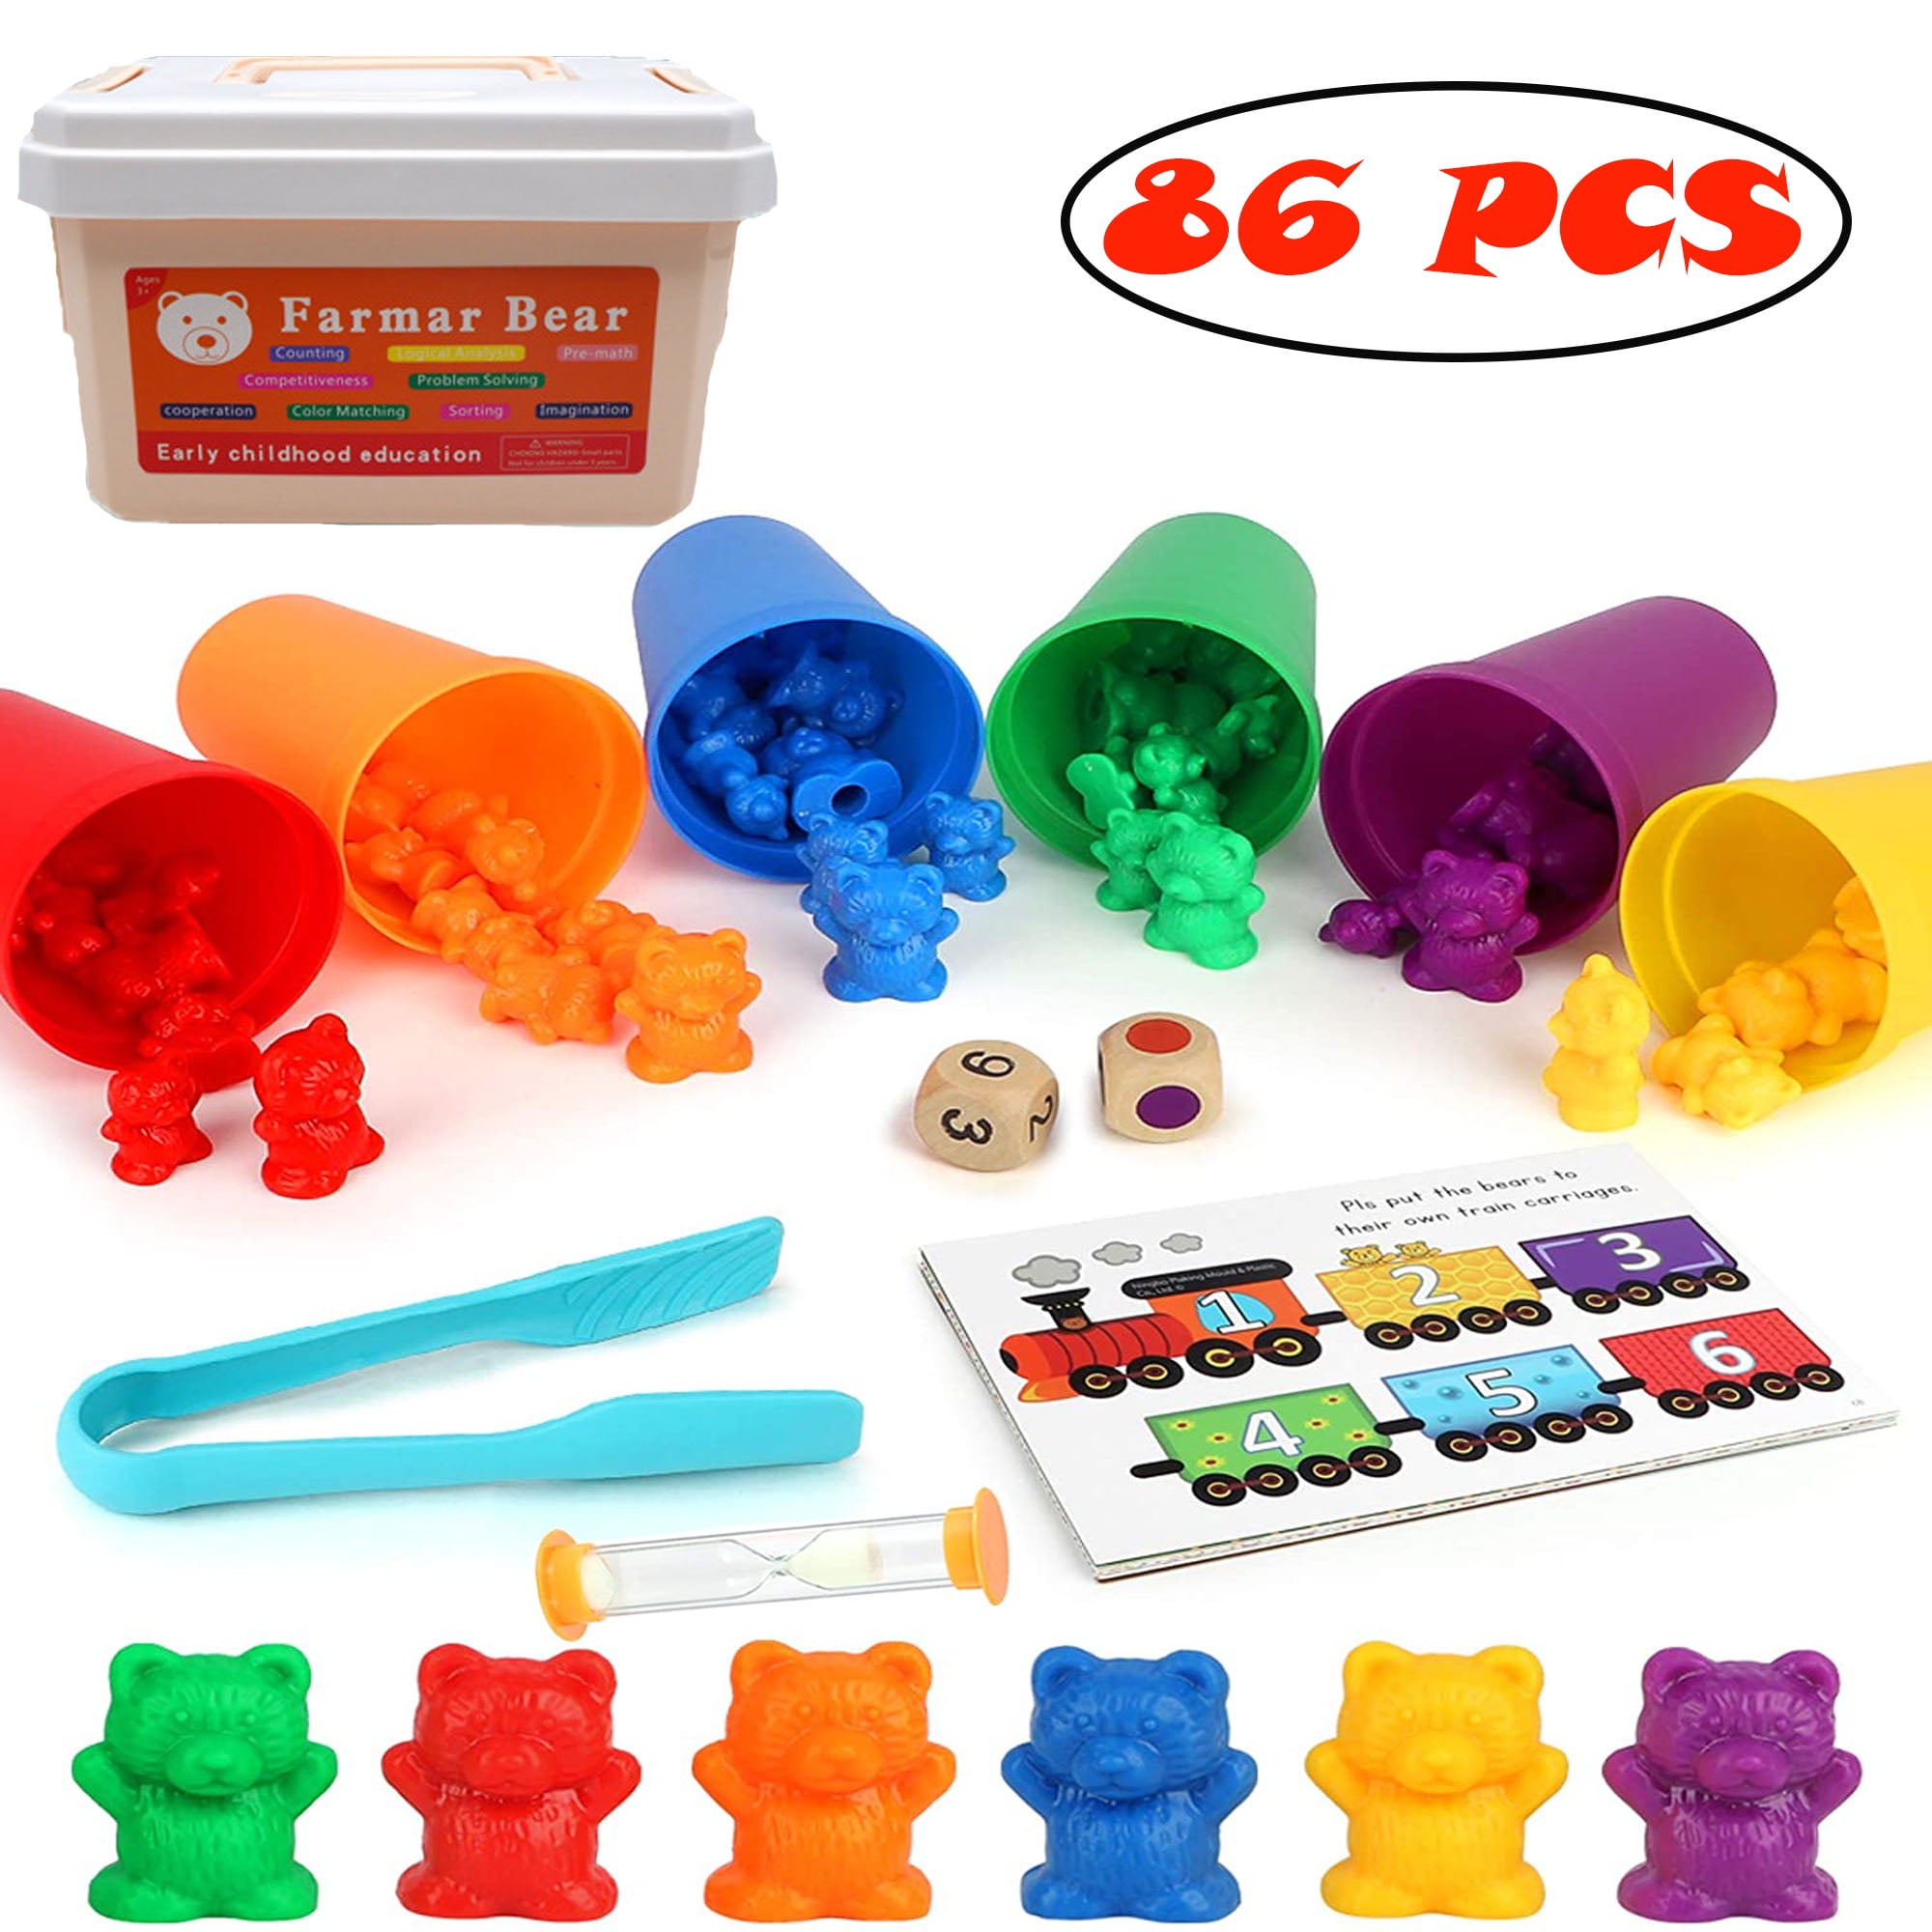 96pcs Plastic Bear Counters Mathematics Counting and Sorting Toys with Cards 